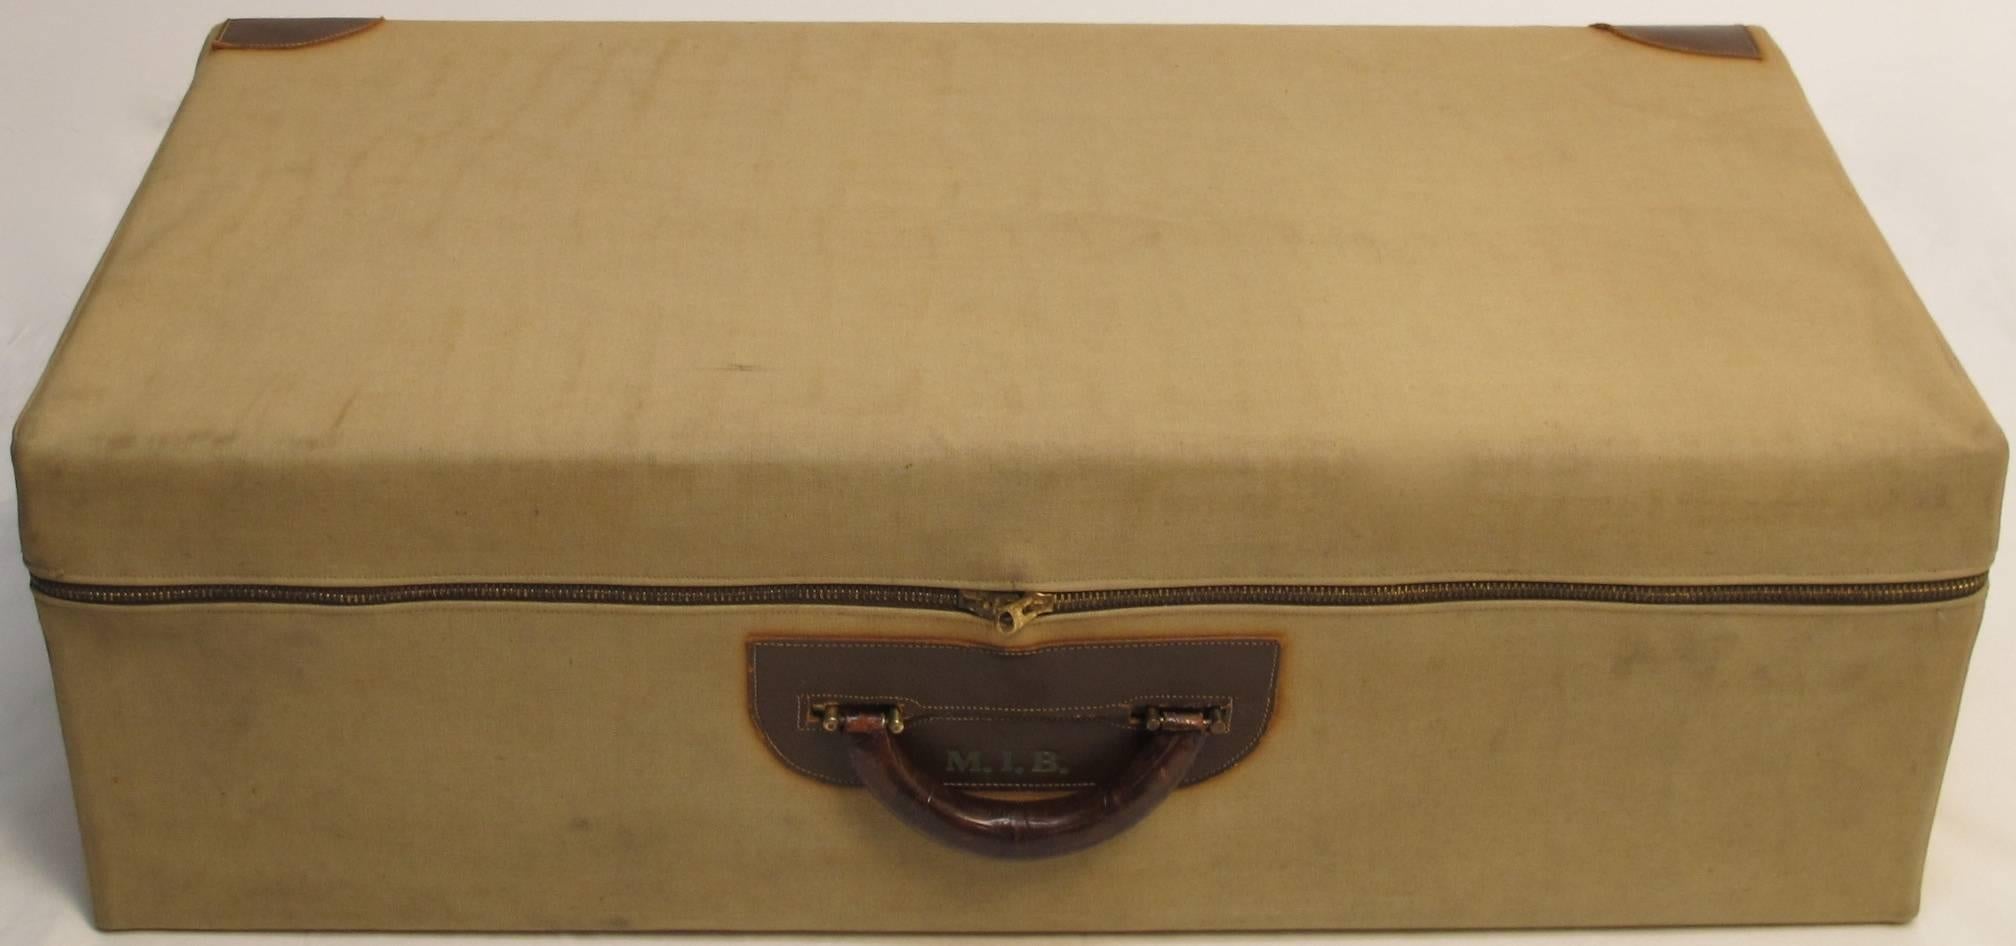 Vintage Alligator Suitcase with Canvas Cover 3